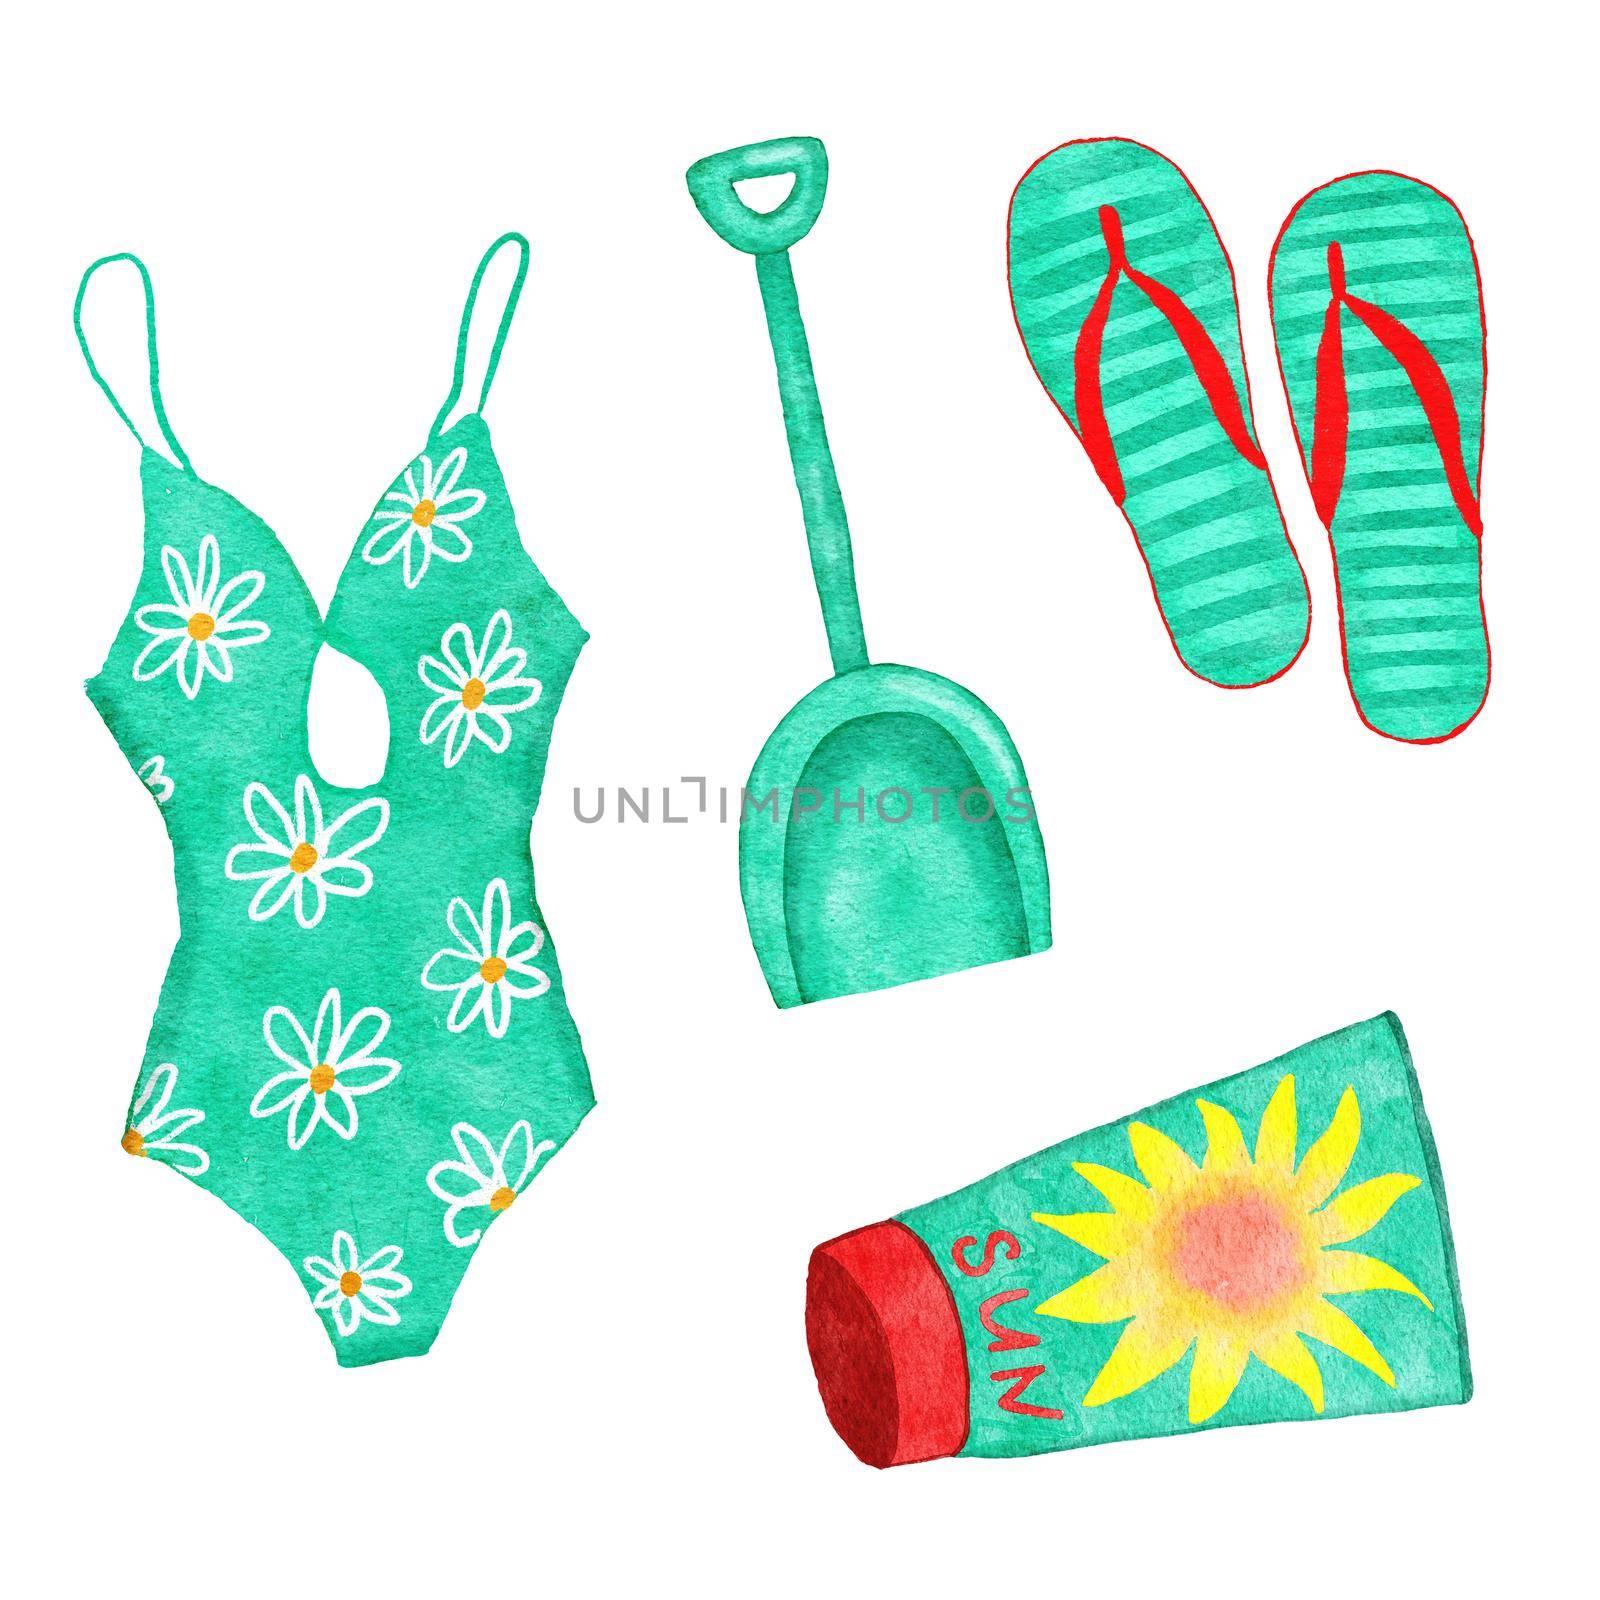 Watecolor hand drawn illsutration in turquoise red yellow colors of swimsuit swimwear bikini, beach shovel striped flip-flops sandals, suntan spf cream. Beach ocean sea holiday vacation elements, colorful bright design clipart